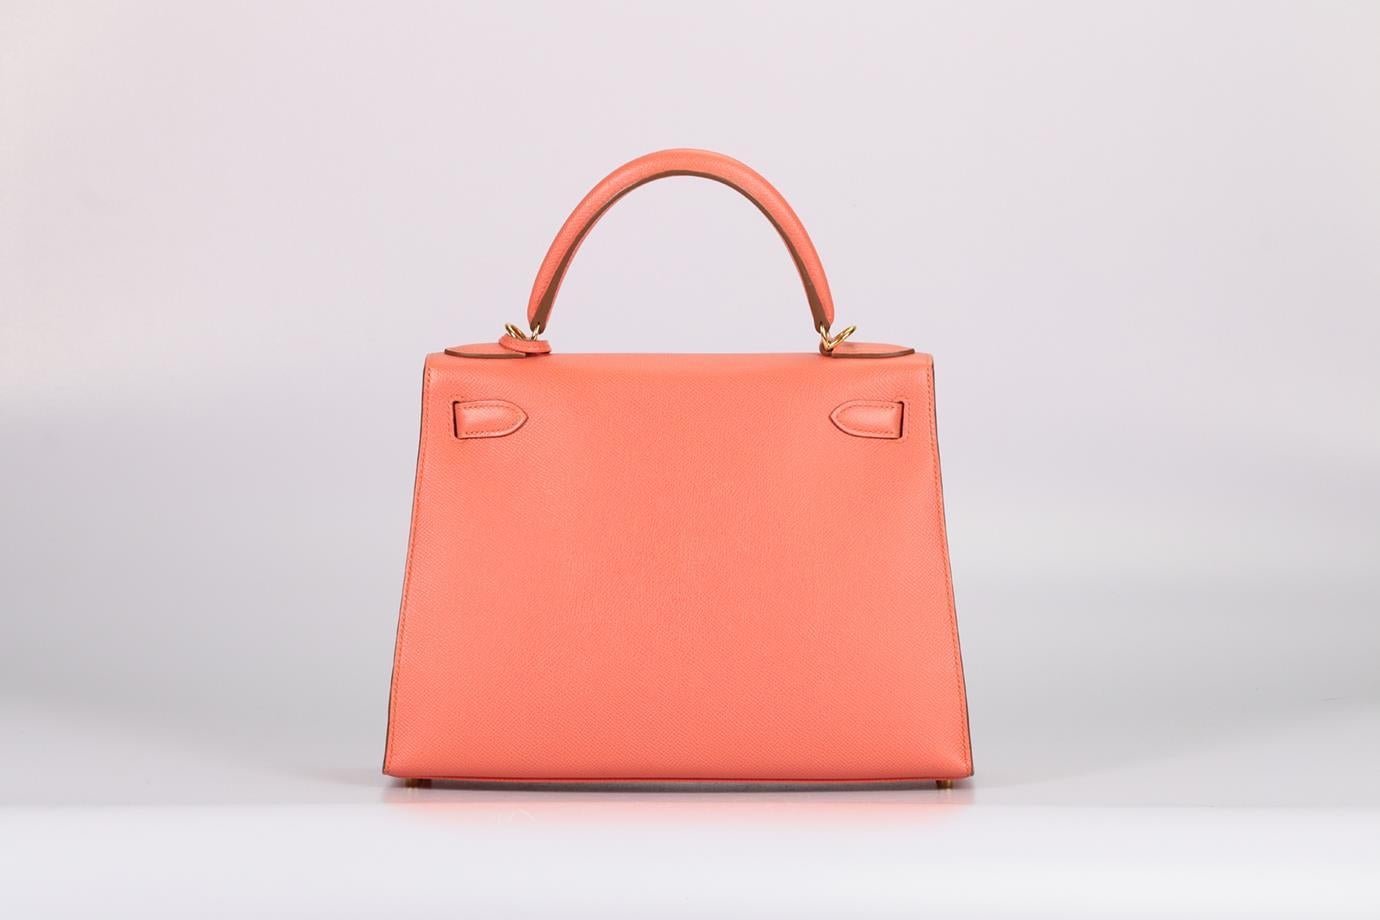 Hermès 2014 Kelly Ii Sellier 28 Cm Epsom Leather Bag In Excellent Condition For Sale In London, GB